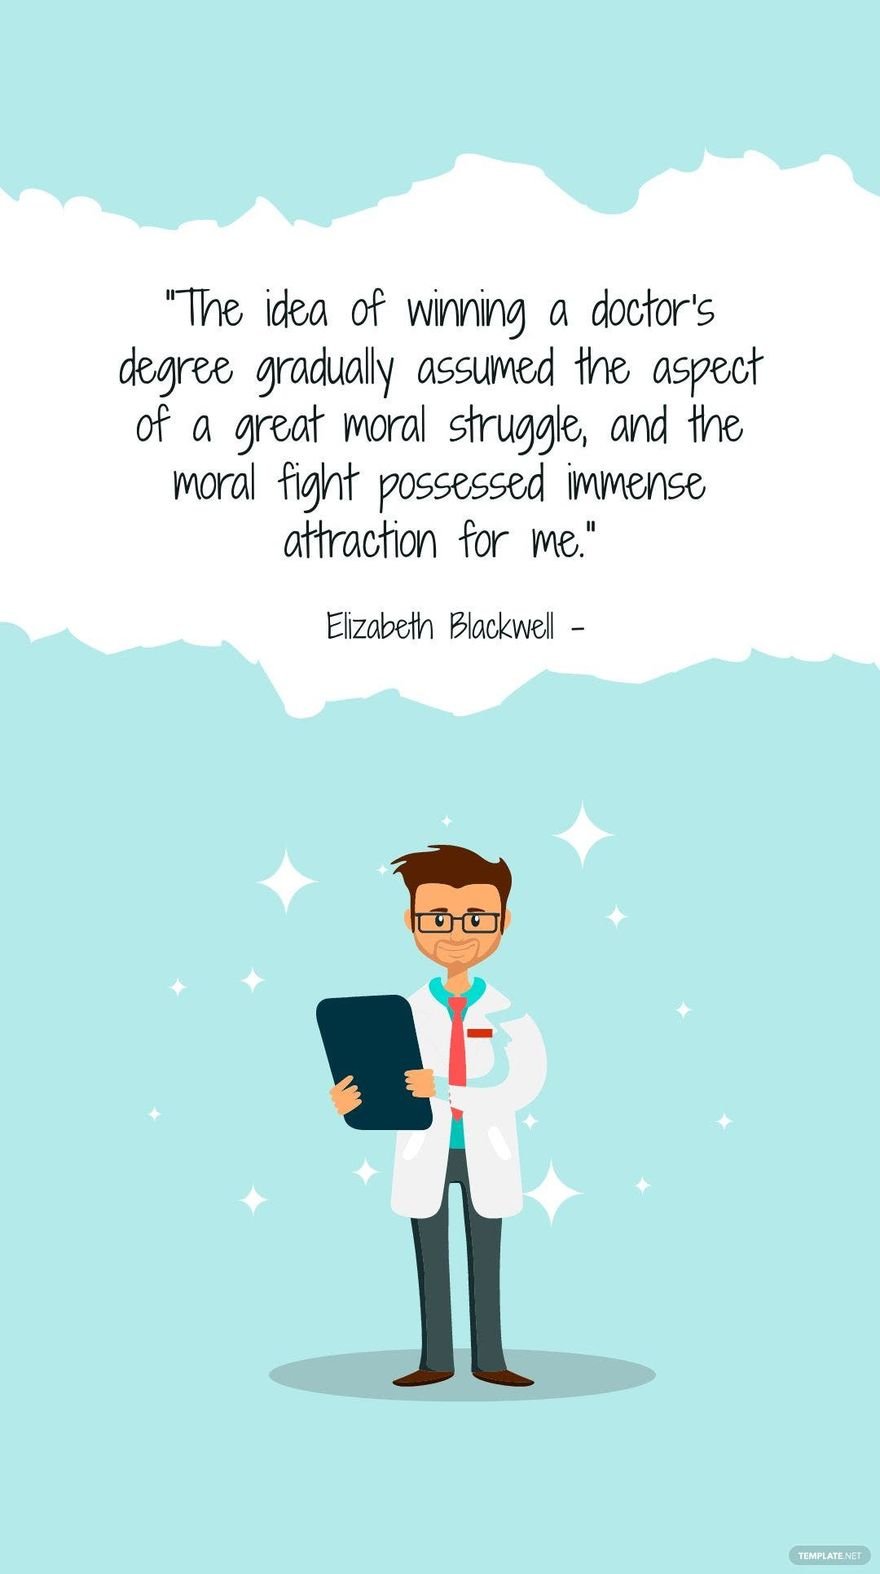 Free Elizabeth Blackwell - The idea of winning a doctor's degree gradually assumed the aspect of a great moral struggle, and the moral fight possessed immense attraction for me. in JPG